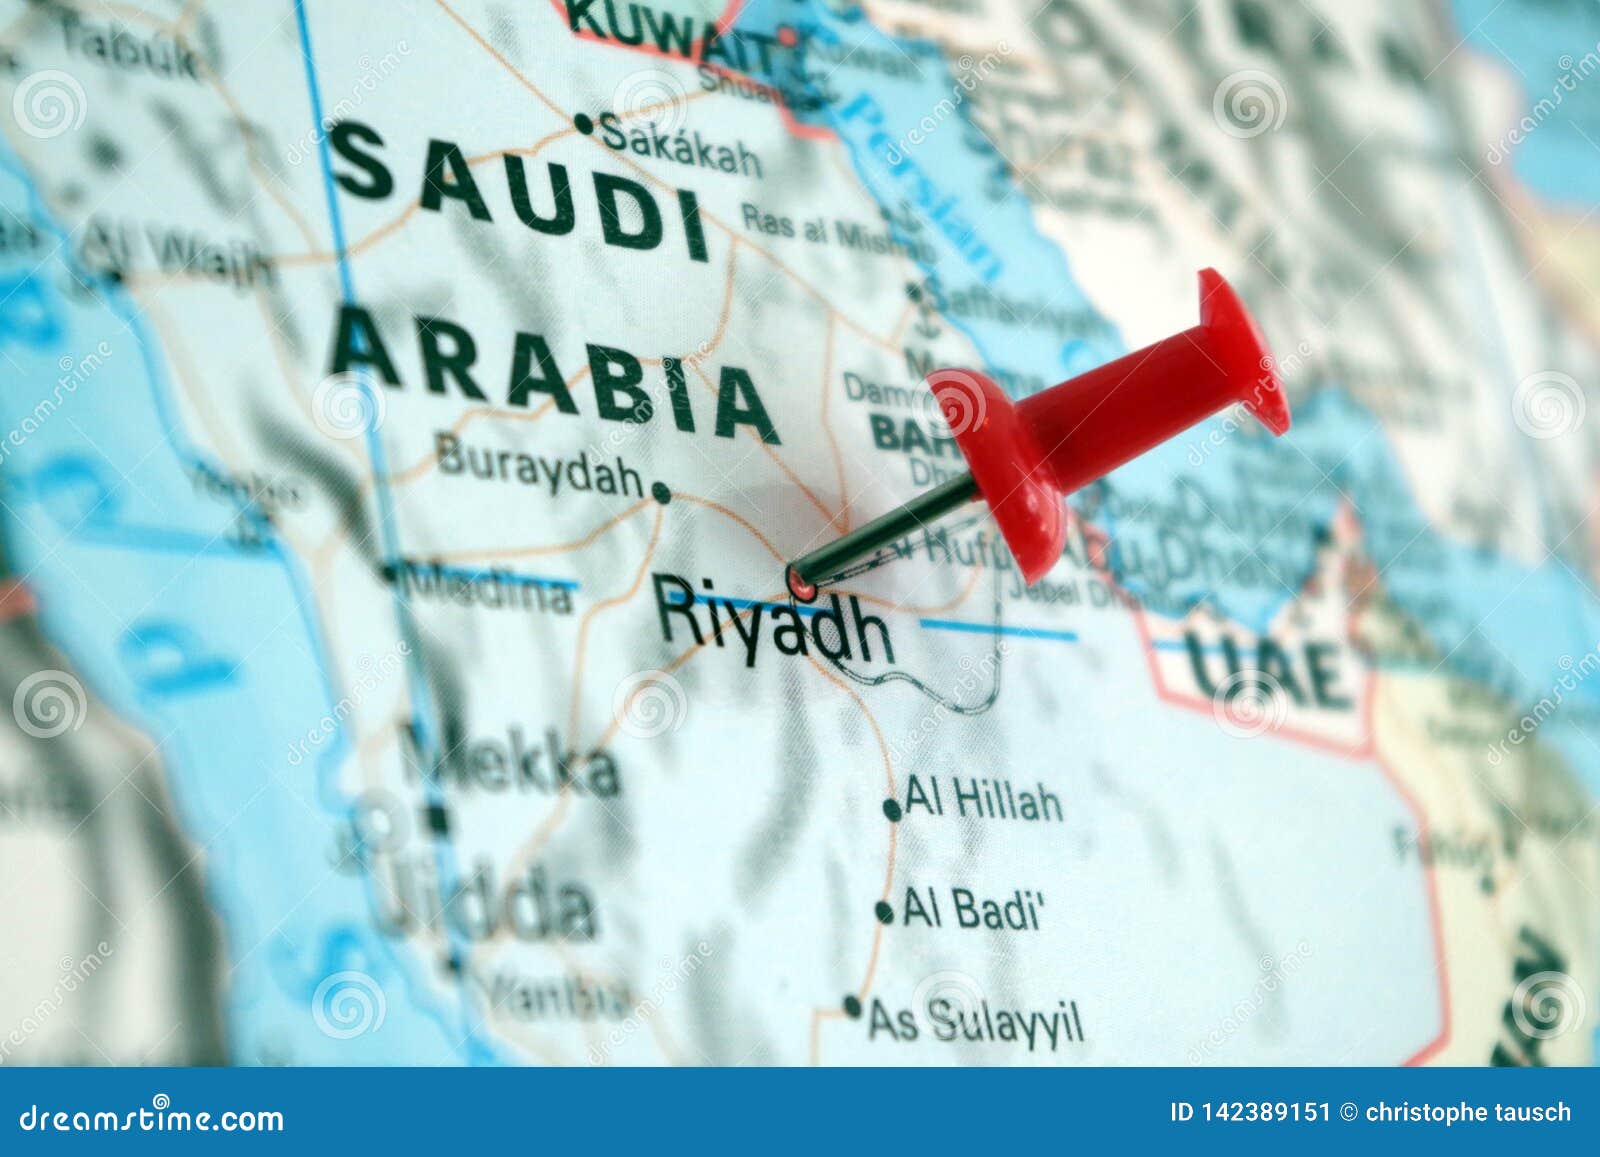 picture of kingdom of saudi arabia on a world map with a red pin on riyadh the capital